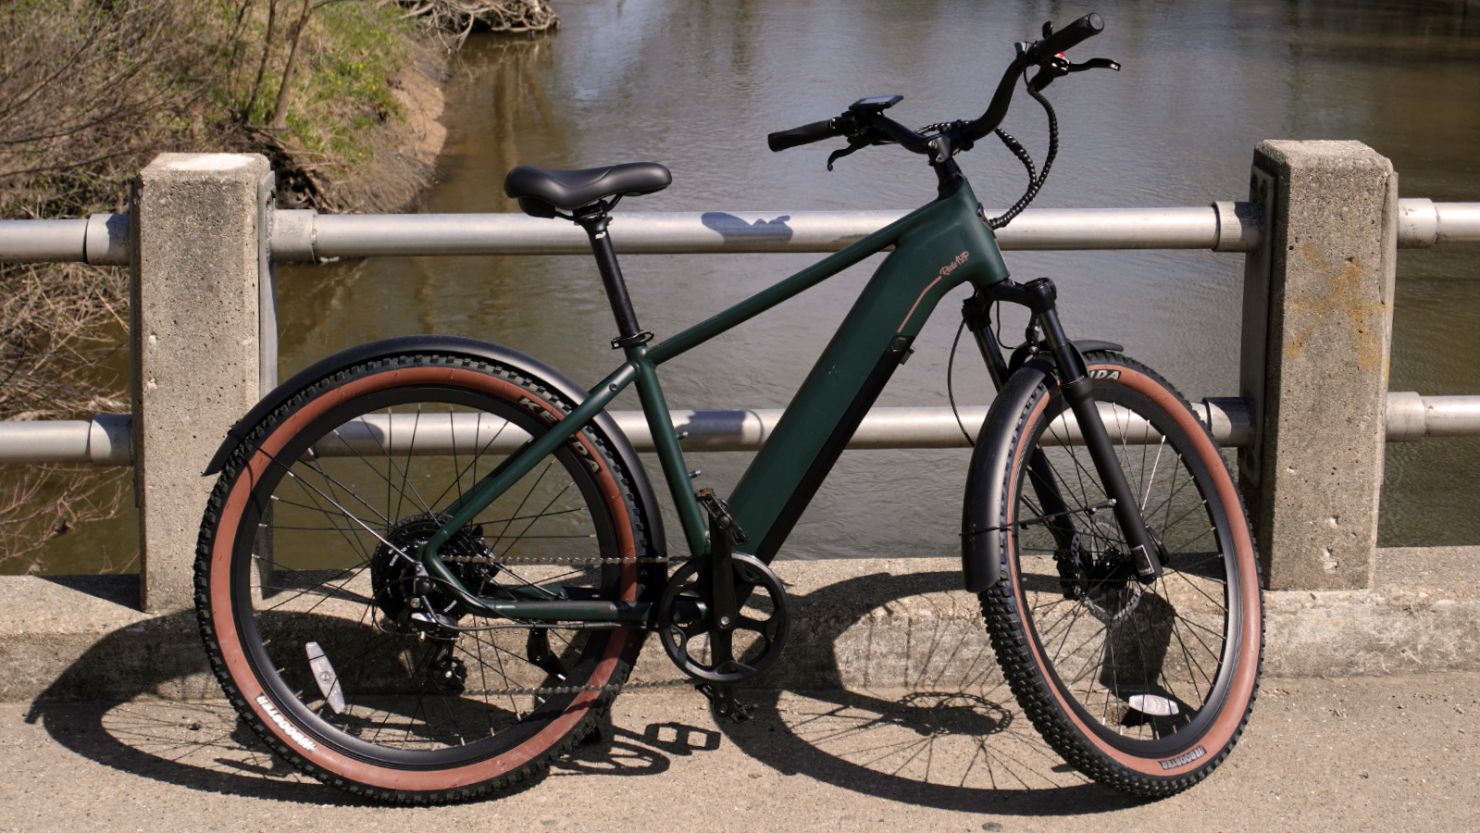 Ride1Up Turris electric bike review